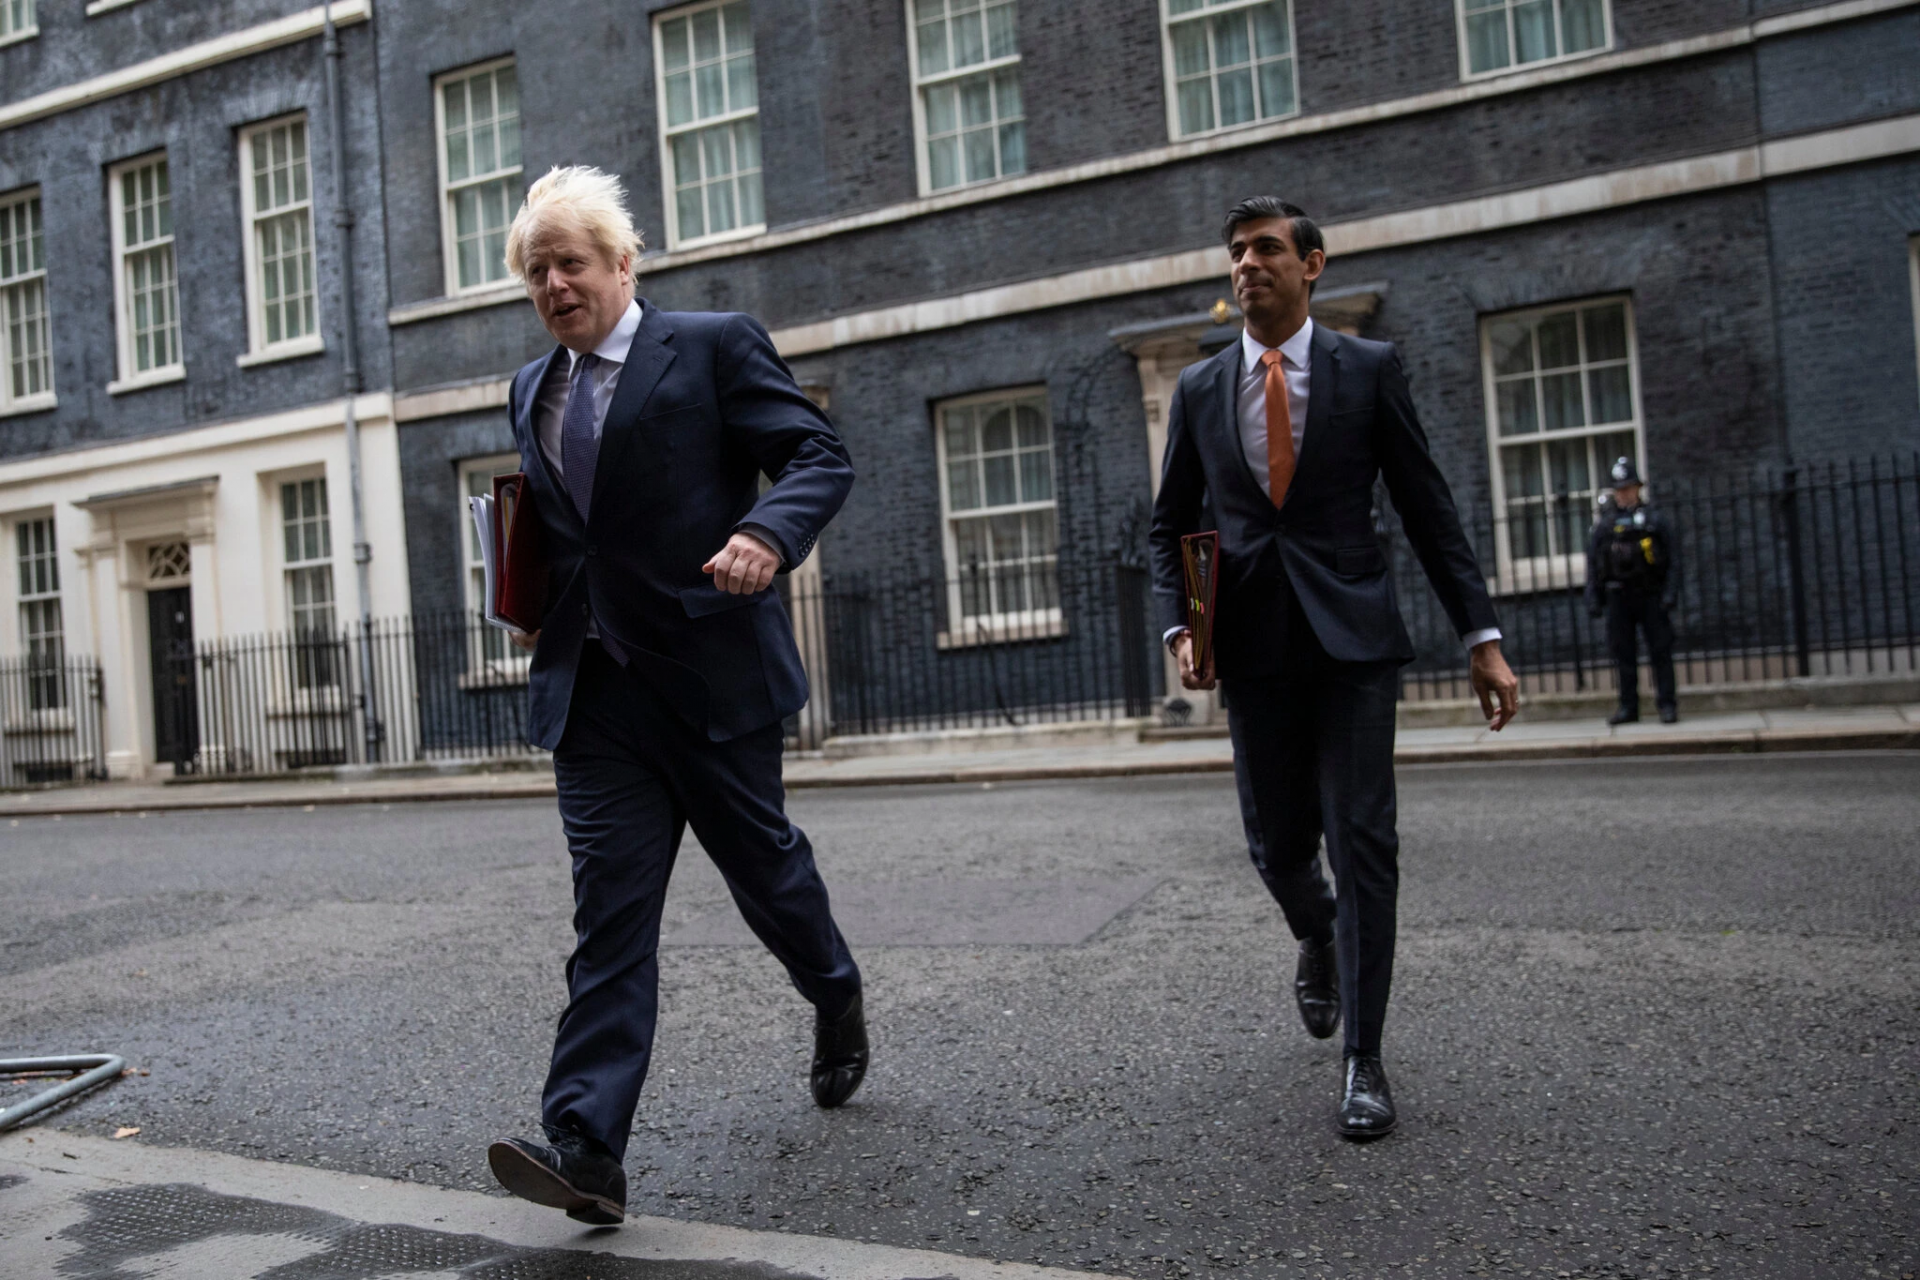 Prime Minister Boris Johnson and his finance chief, Rishi Sunak, the chancellor of the Exchequer, in London in October. They both said on Sunday that they would enter quarantine.Credit...Dan Kitwood/Getty Images